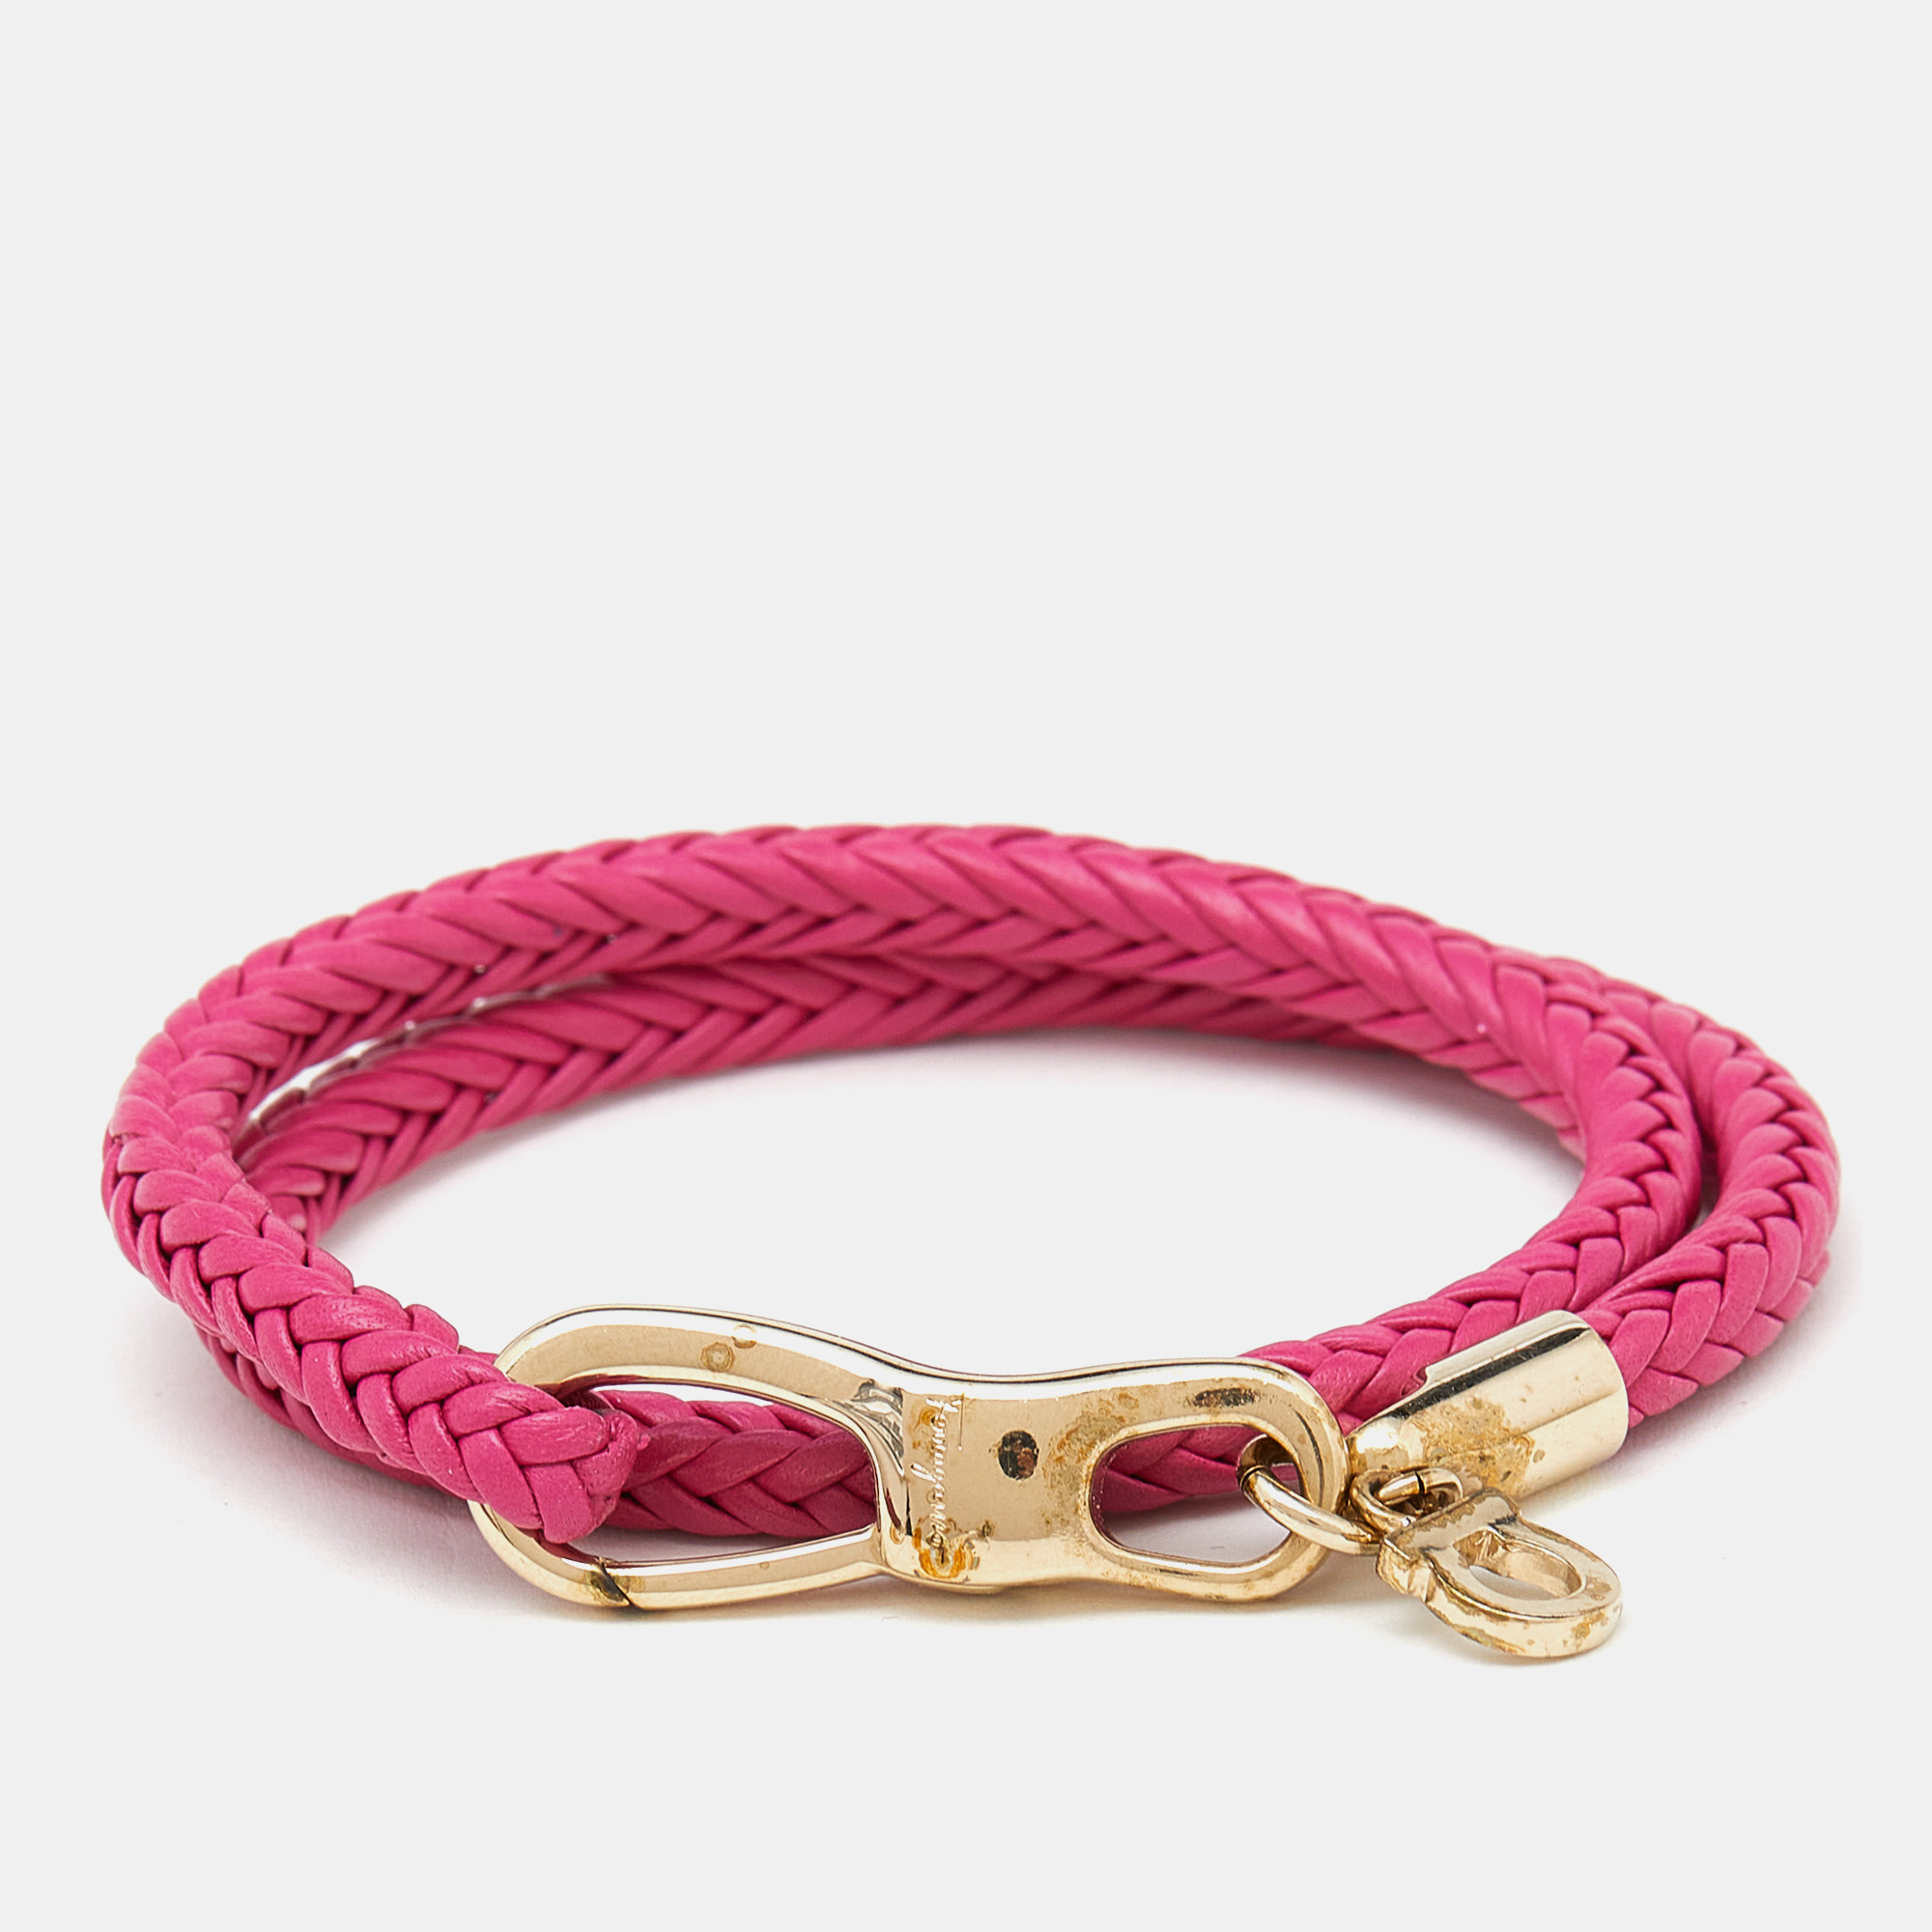 Artfully made from braided leather and gold tone metal this flawless bracelet by Salvatore Ferragamo can be your next prized possession. It features the signature Gancio motif a pink hue and logo detailing. it is finished with a lobster clasp.